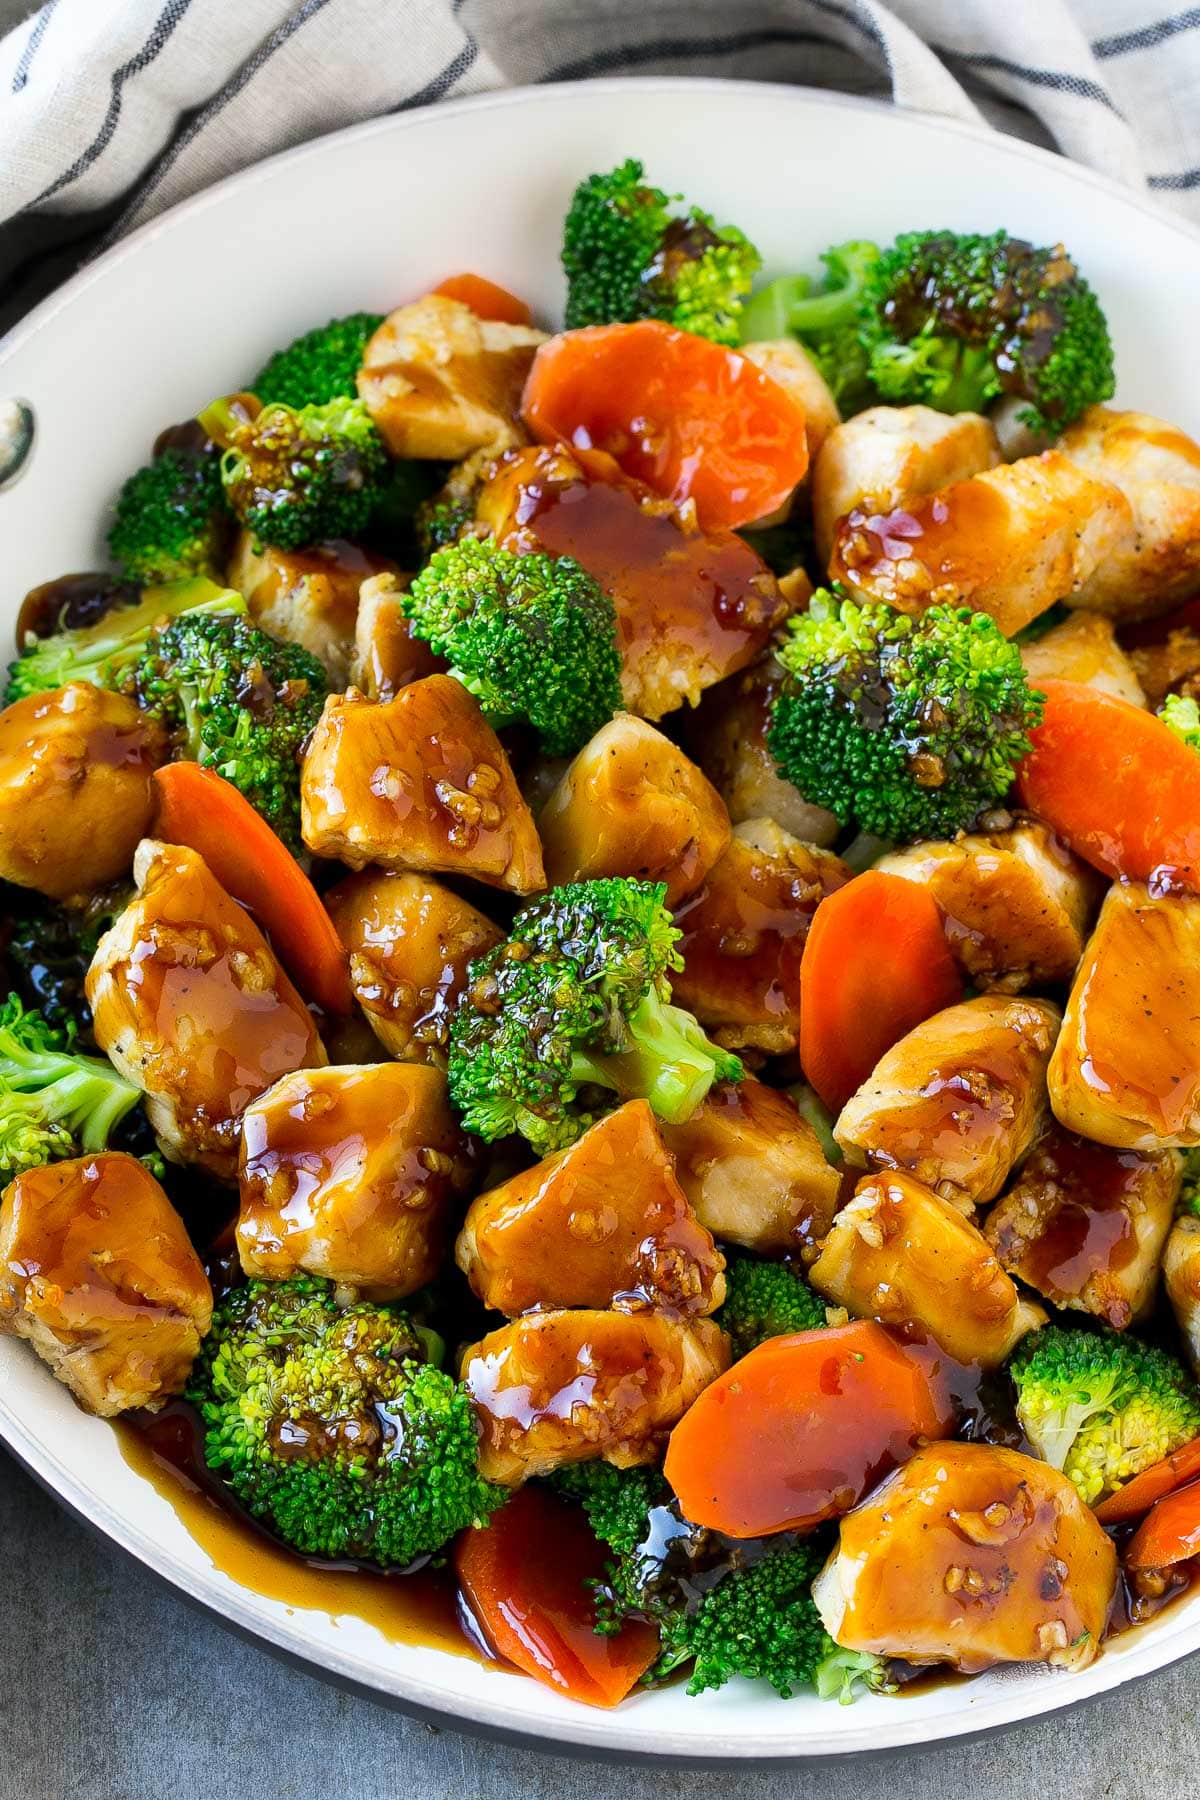 A pan of honey garlic chicken stir fry with broccoli and carrots.